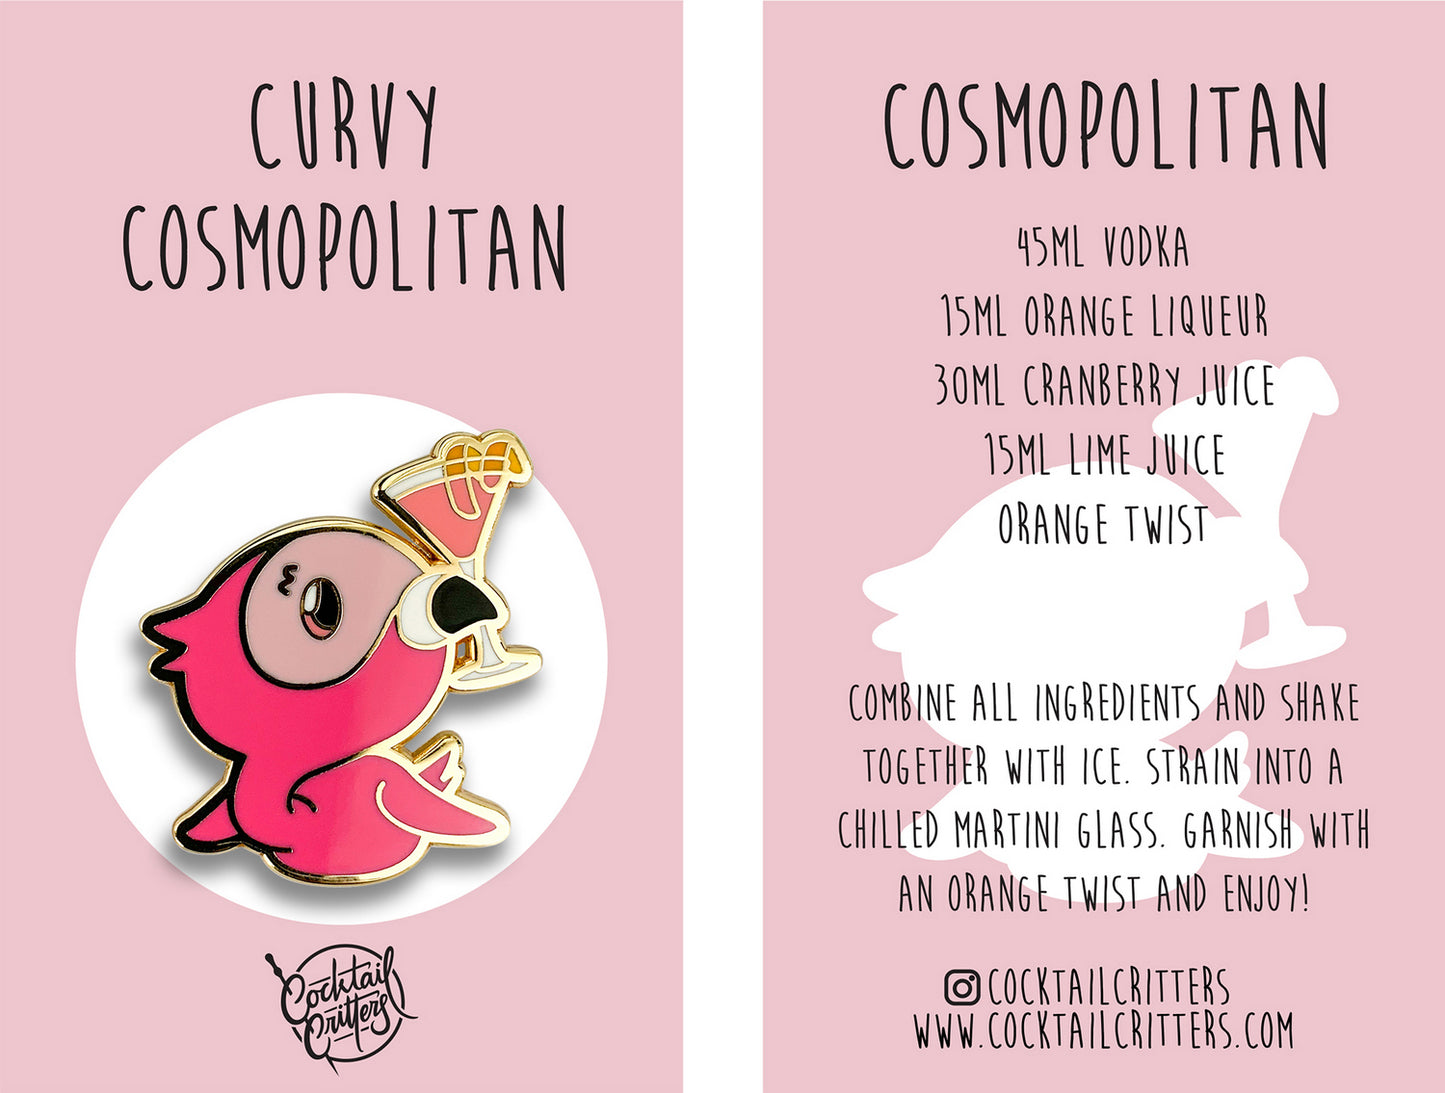 Curvy Cosmopolitan Cocktail Enamel Pin by Cocktail Critters